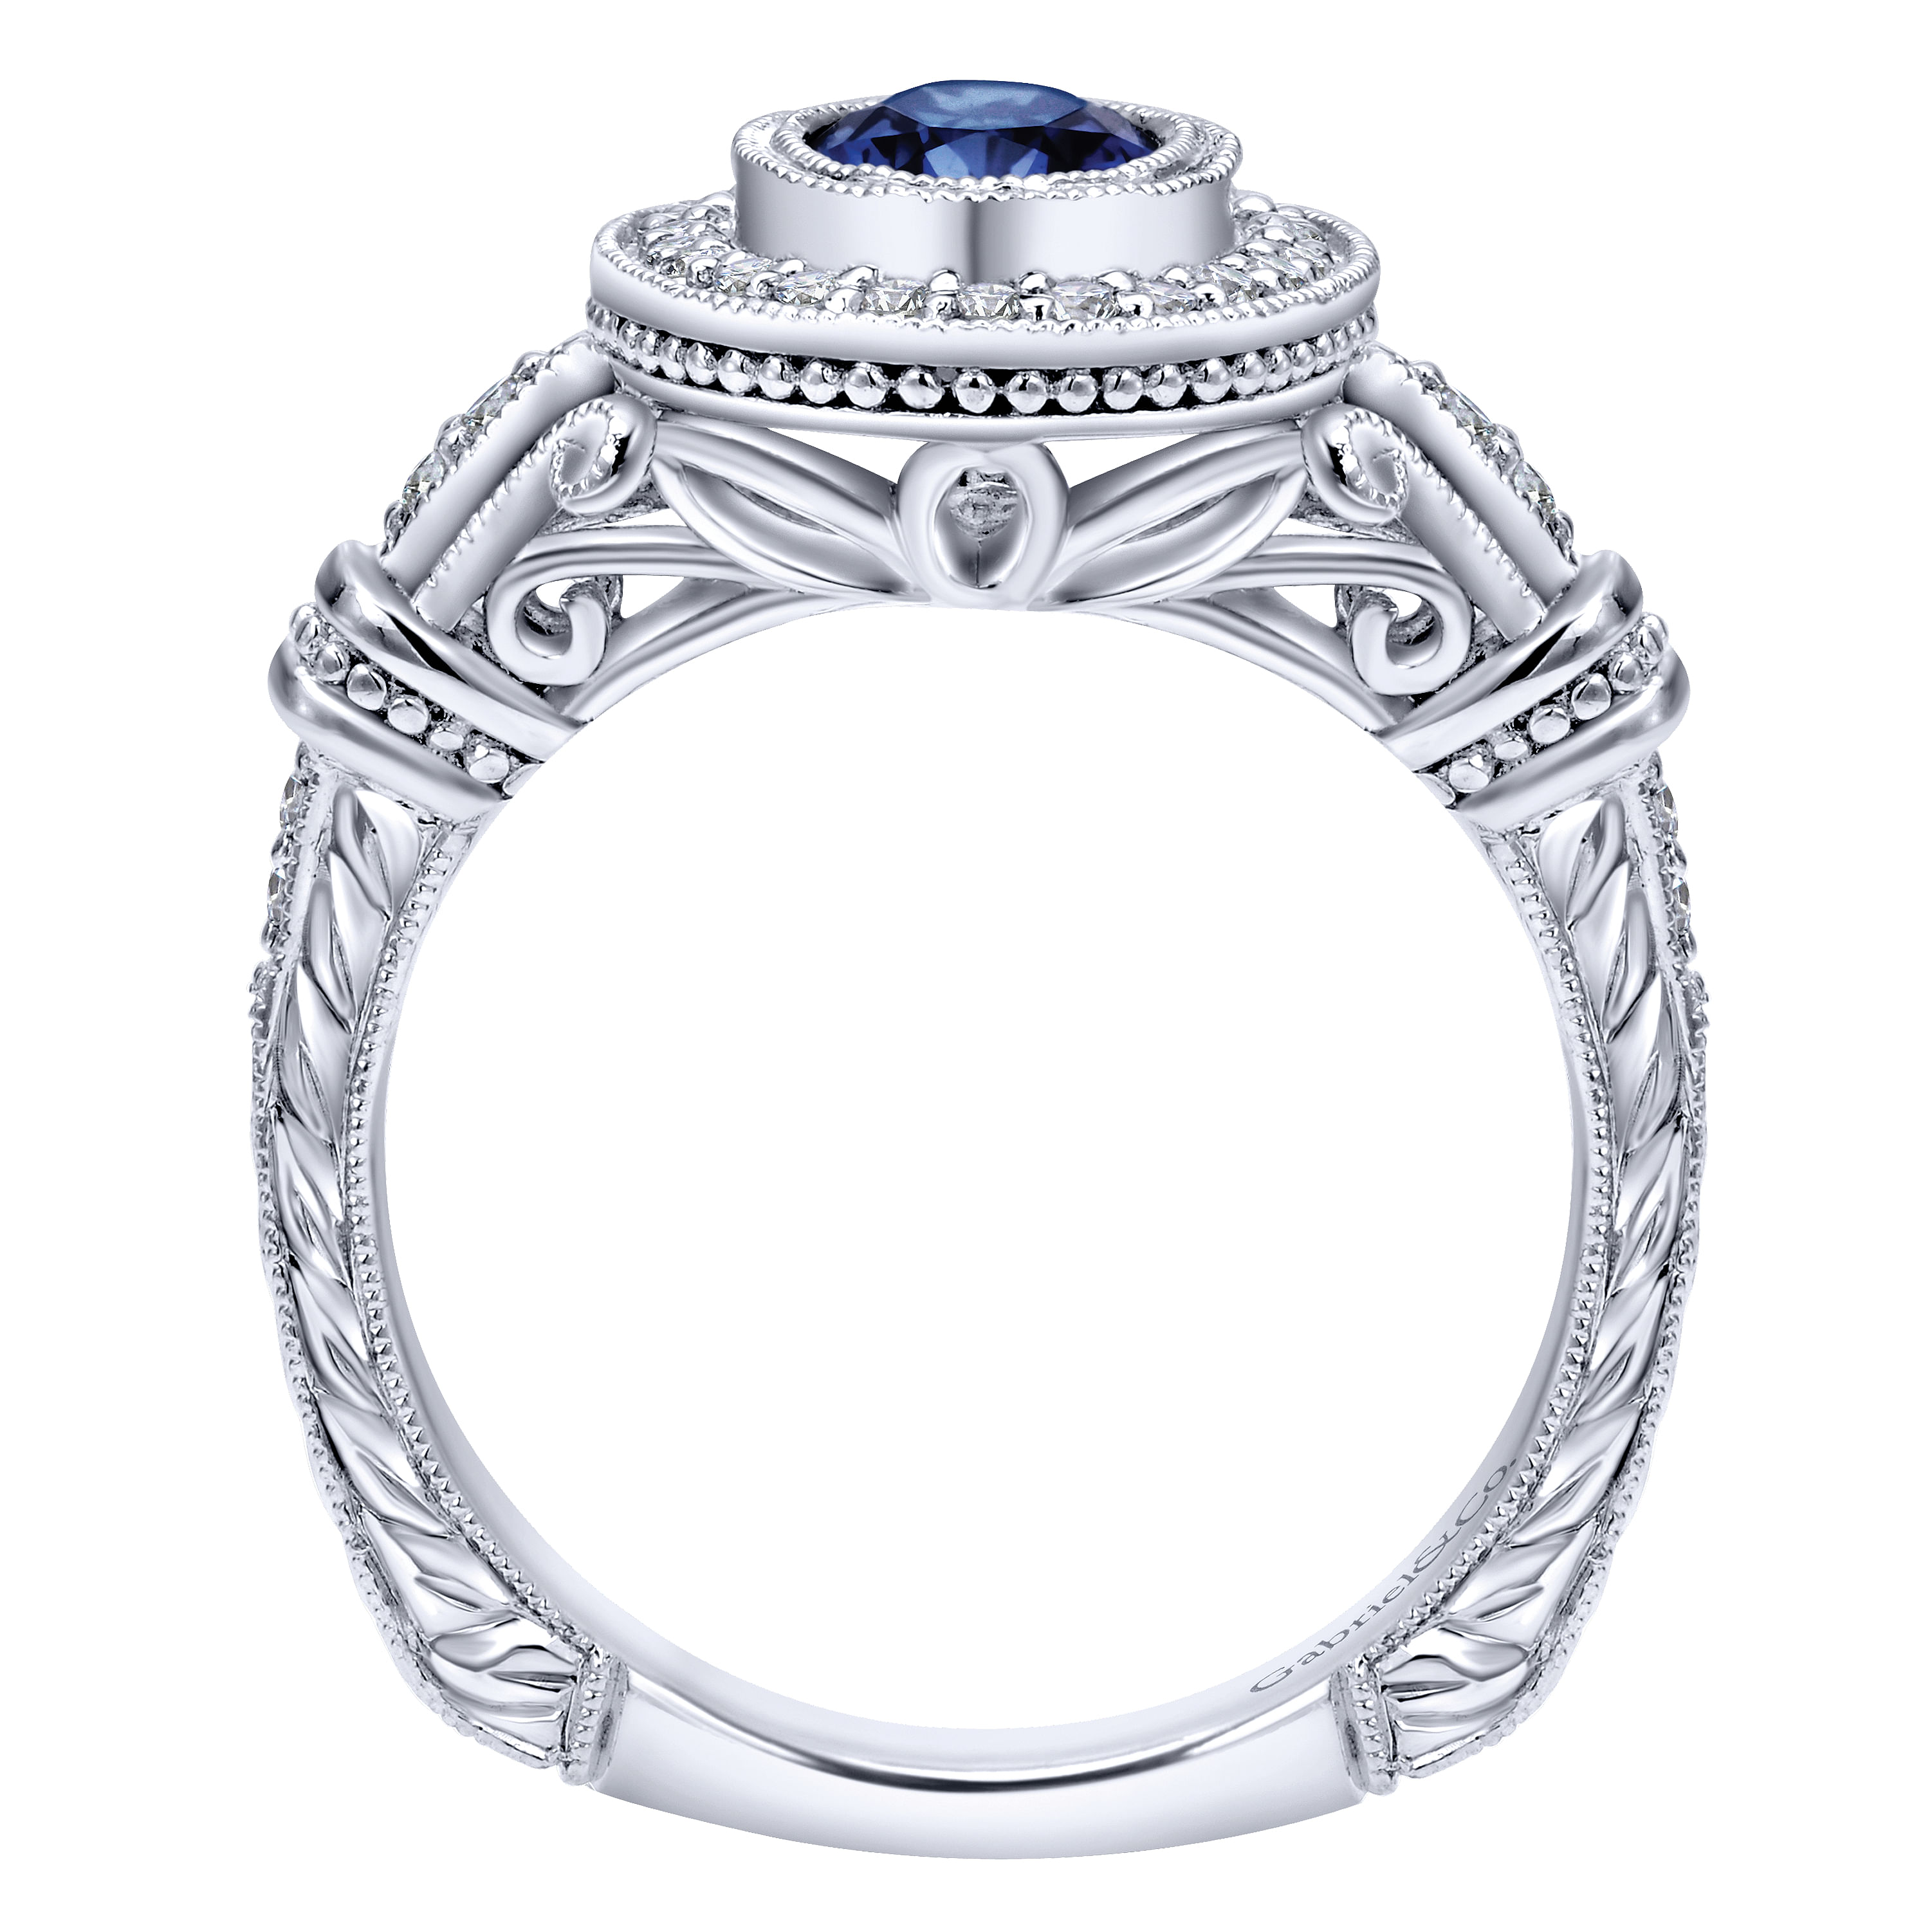 14k White Gold Vintage Inspired Classic Oval Sapphire and Diamond Halo Ring